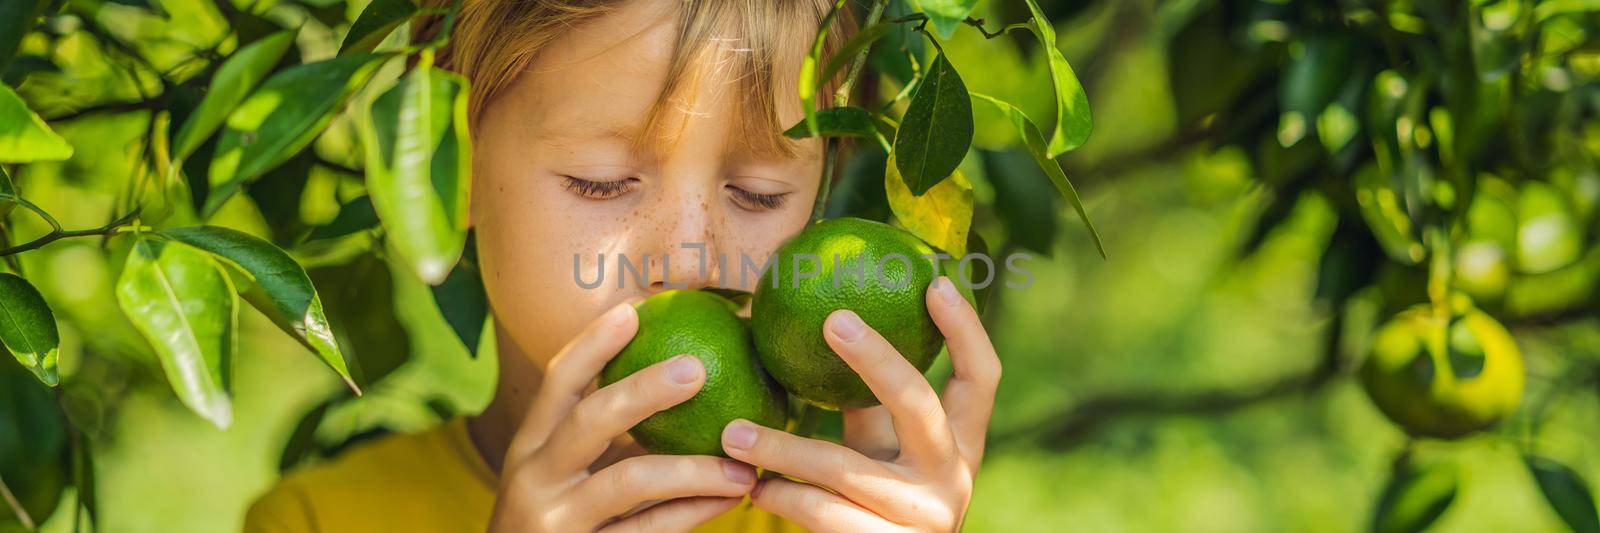 Cute boy in the garden collects tangerines BANNER, LONG FORMAT by galitskaya